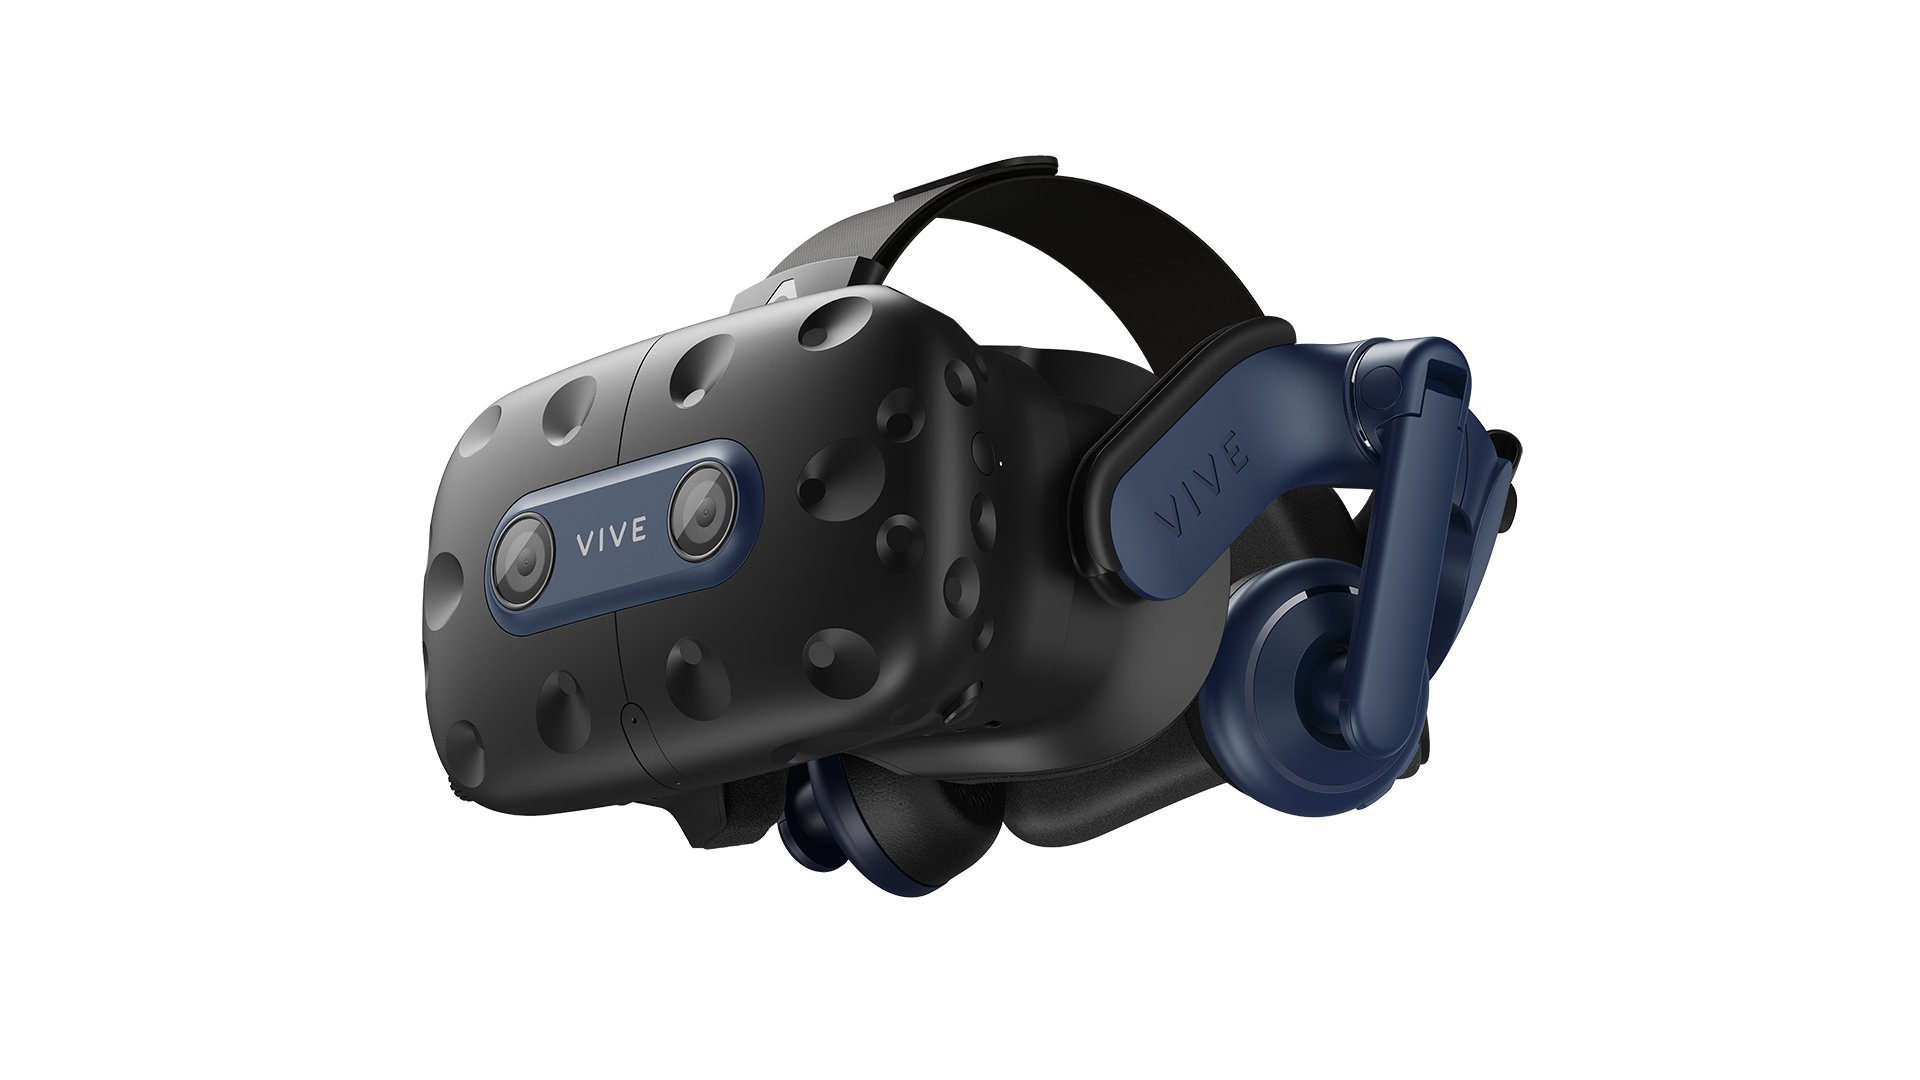 HTC Vive Pro review: Better in every way, but it's not for you